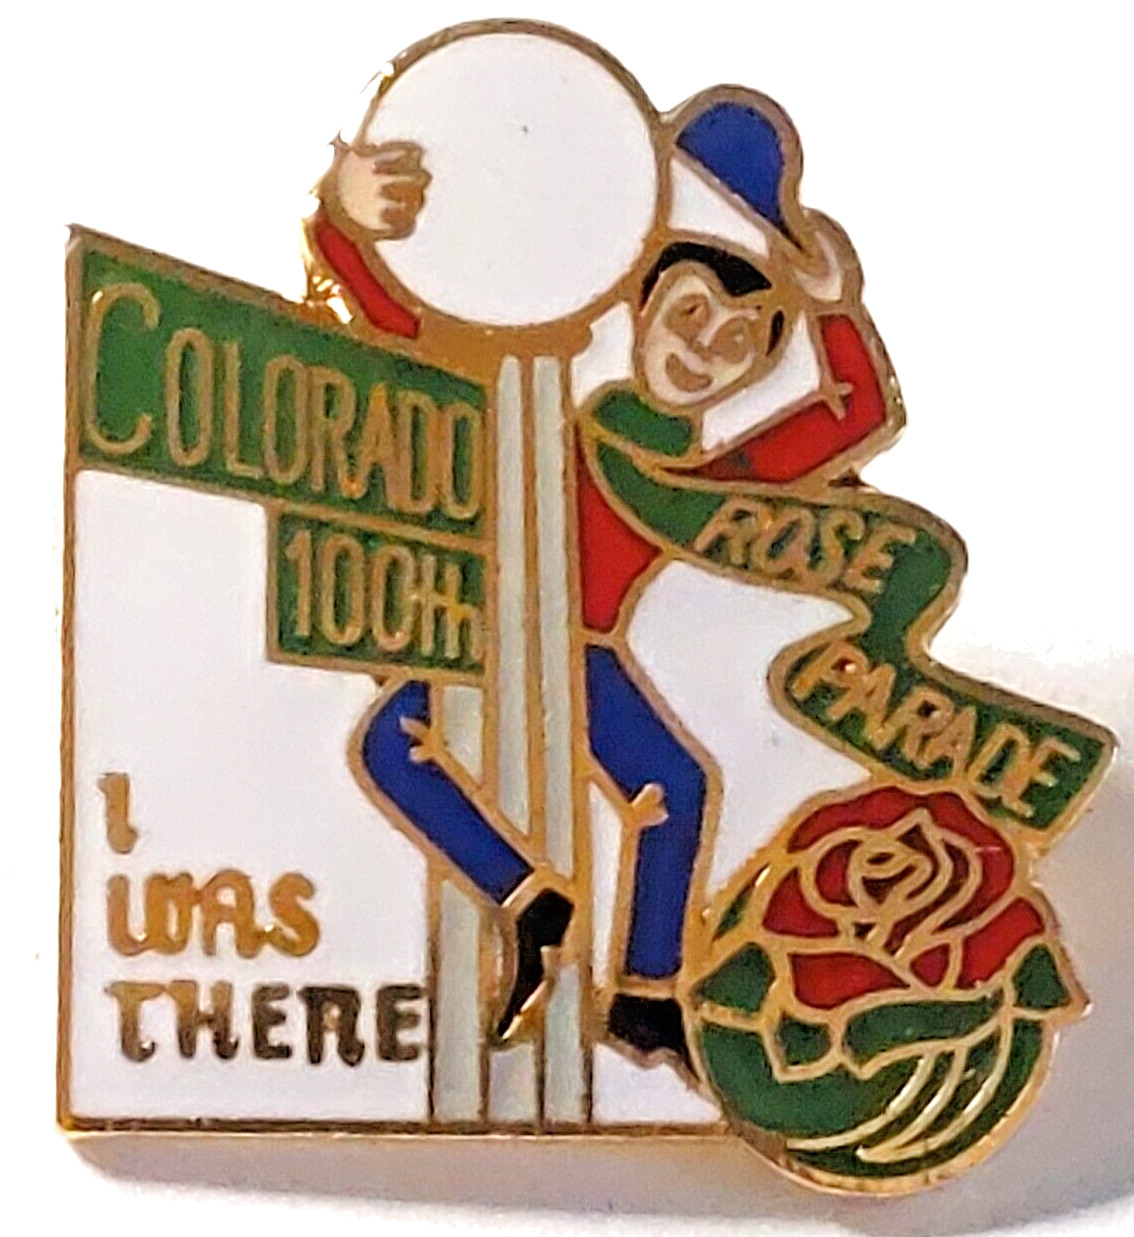 Rose Parade 1989 I WAS THERE 100th Tournament of Roses Lapel Pin